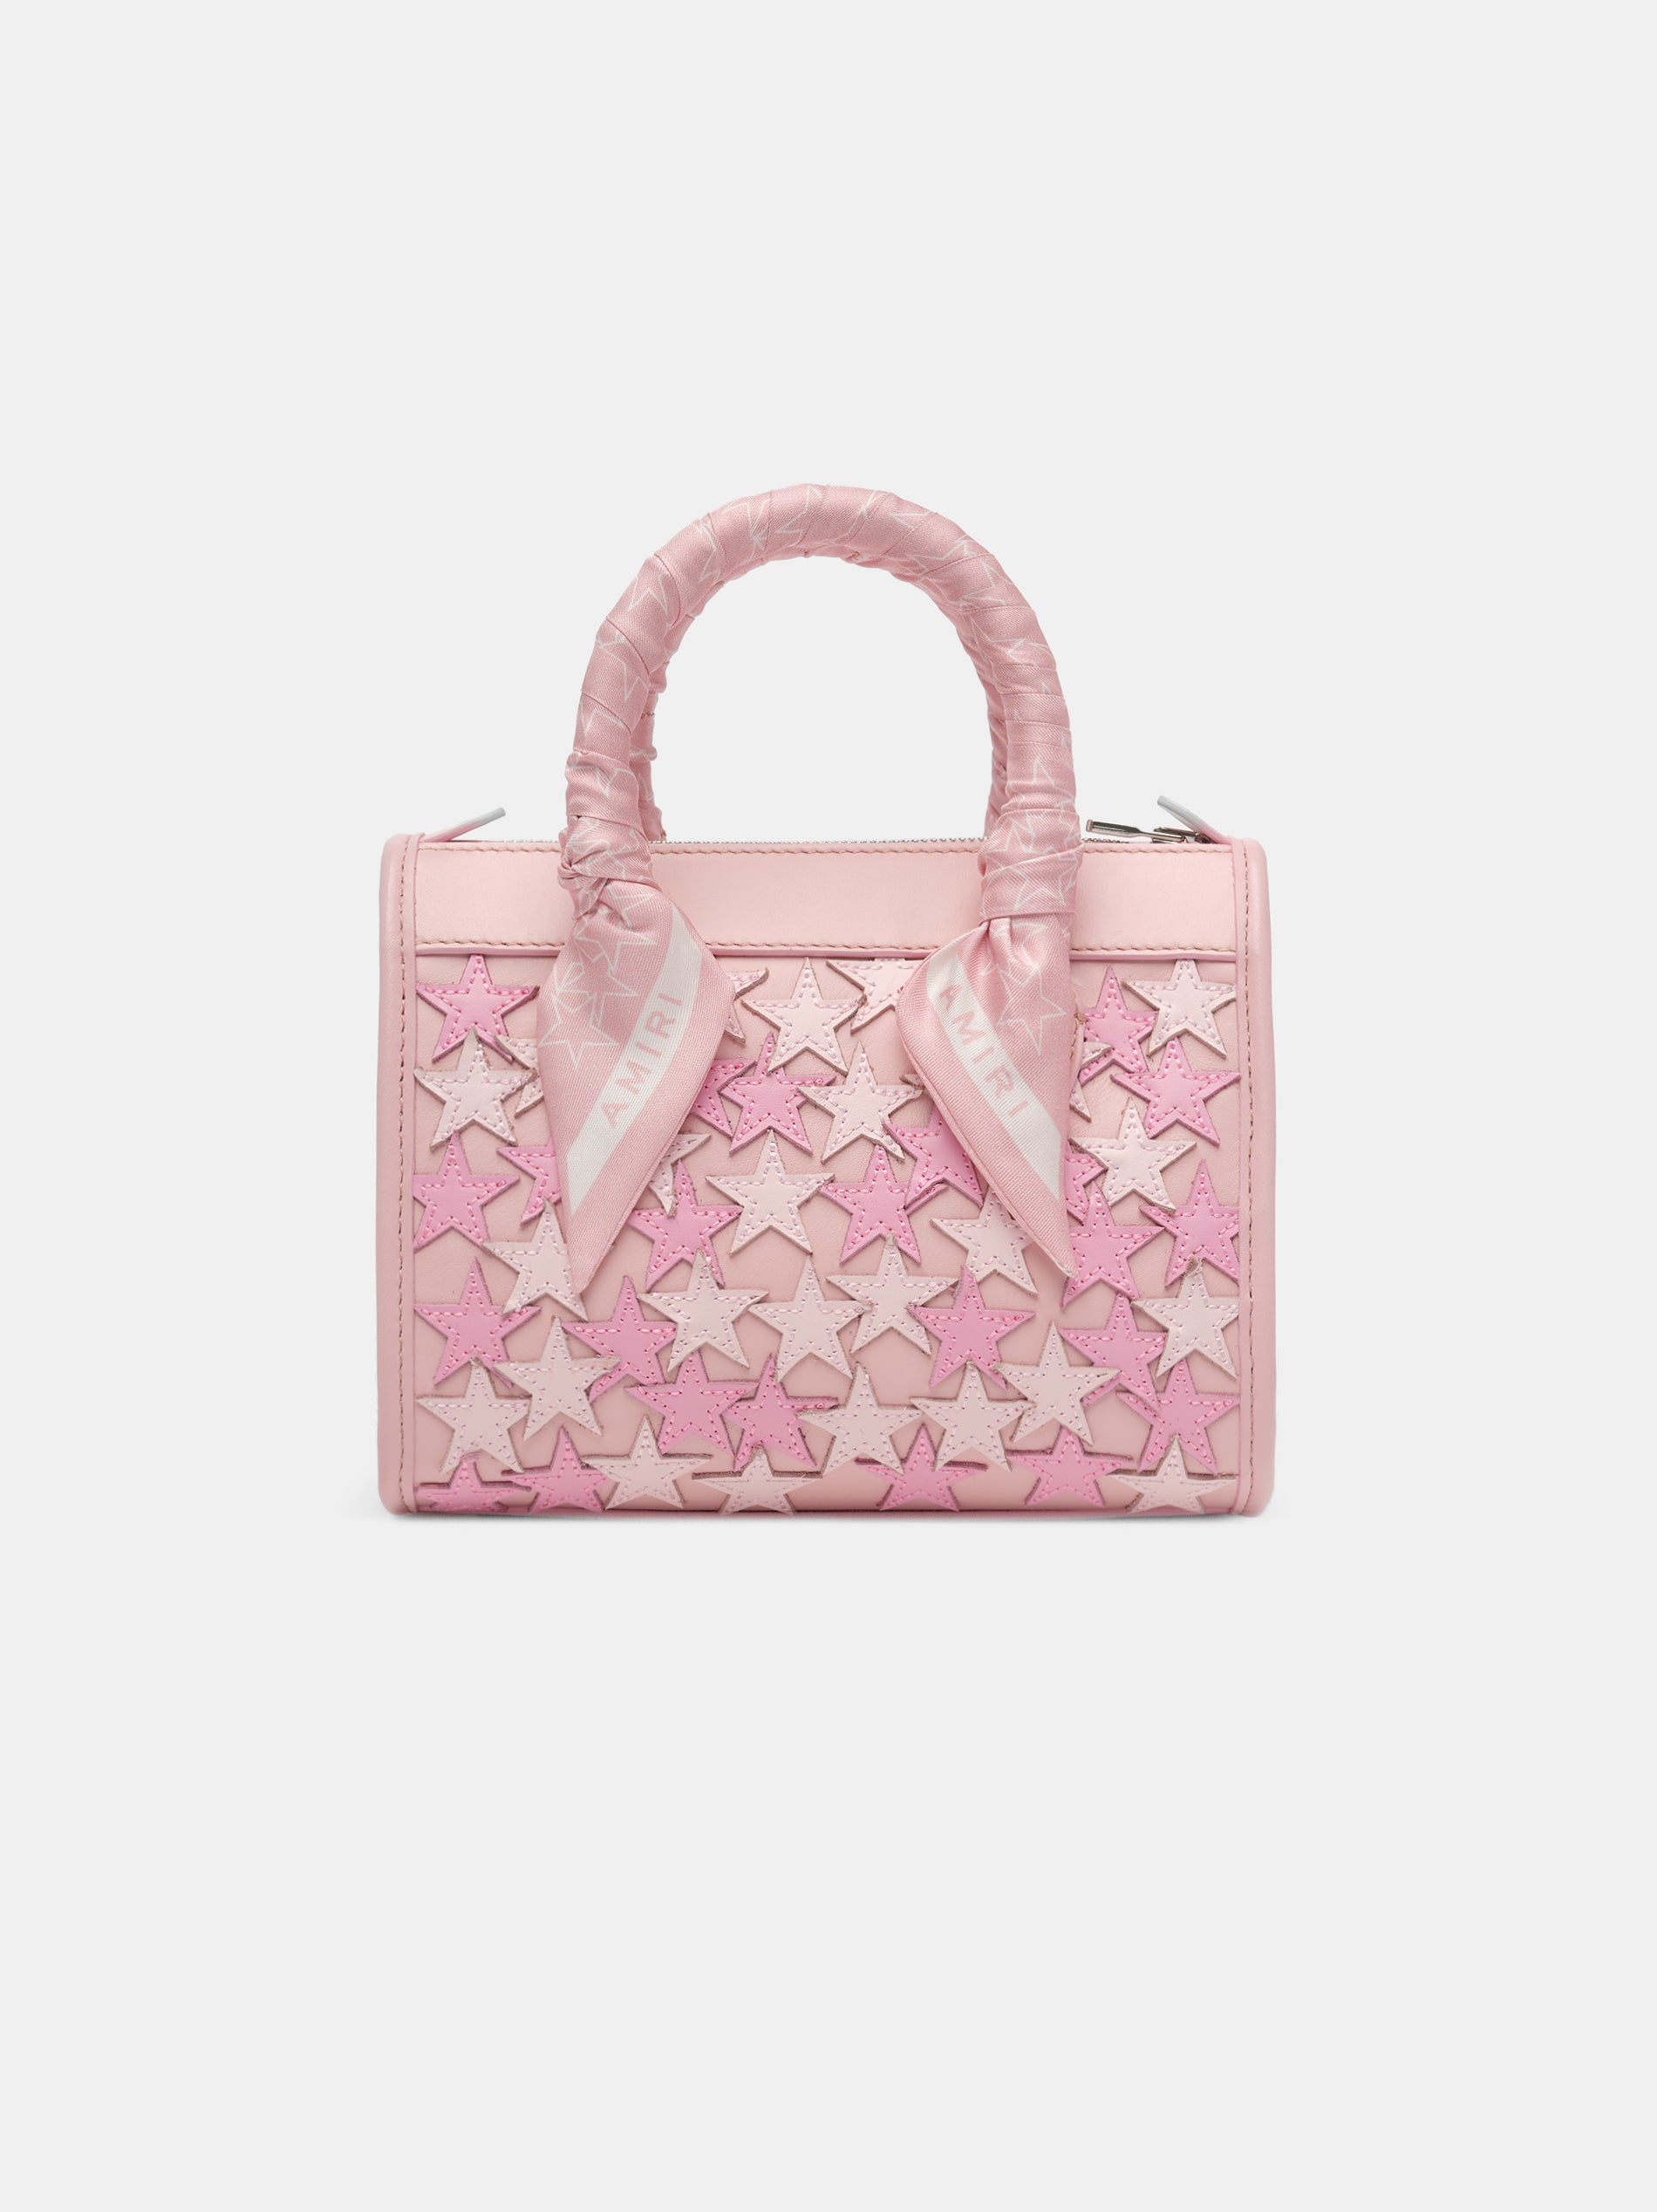 Product WOMEN - STARS MICRO TRIANGLE BAG - Pink featured image